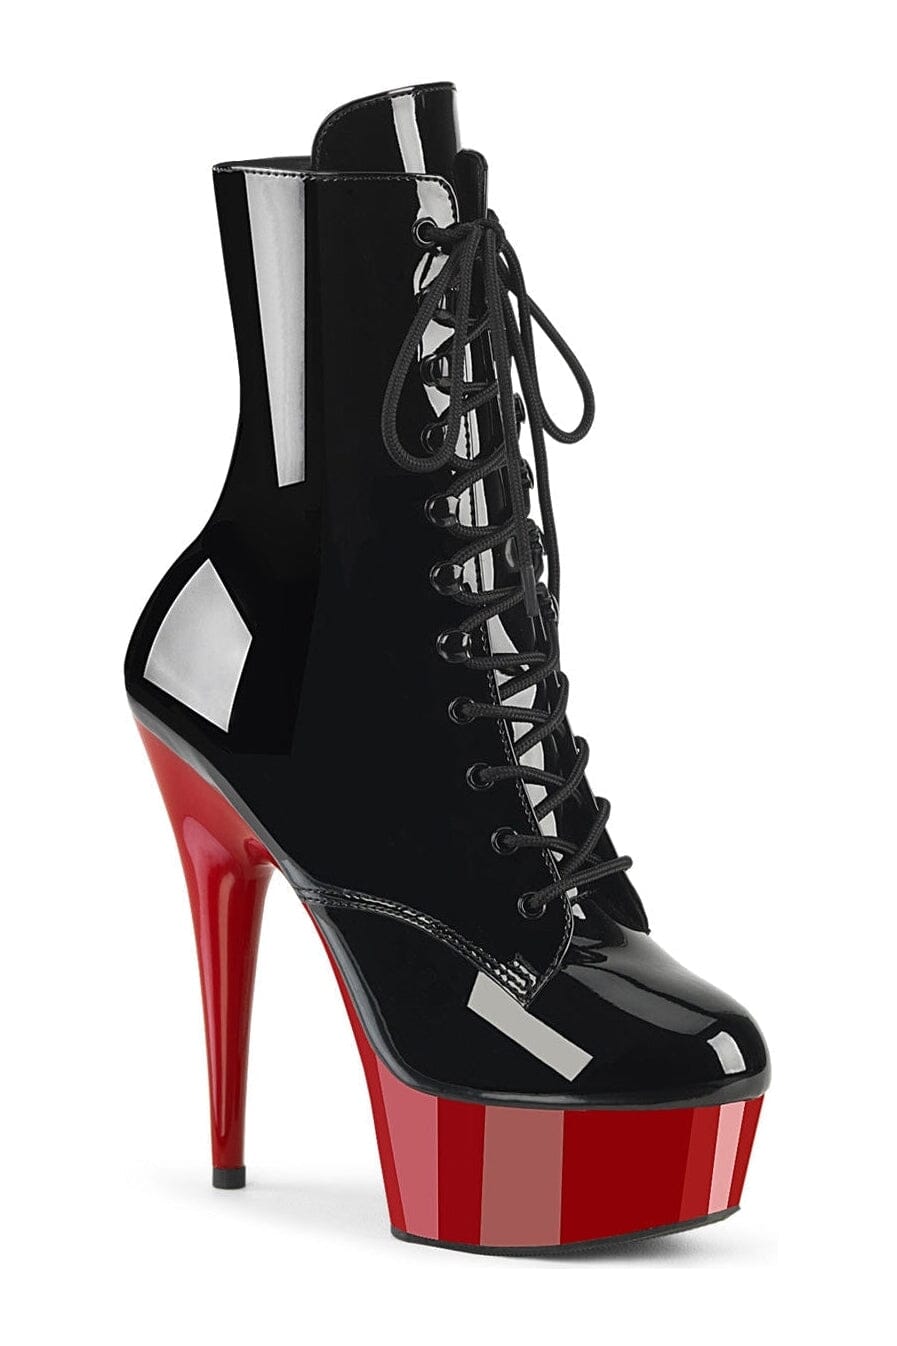 DELIGHT-1020 Black Patent Ankle Boot-Ankle Boots-Pleaser-Black-10-Patent-SEXYSHOES.COM